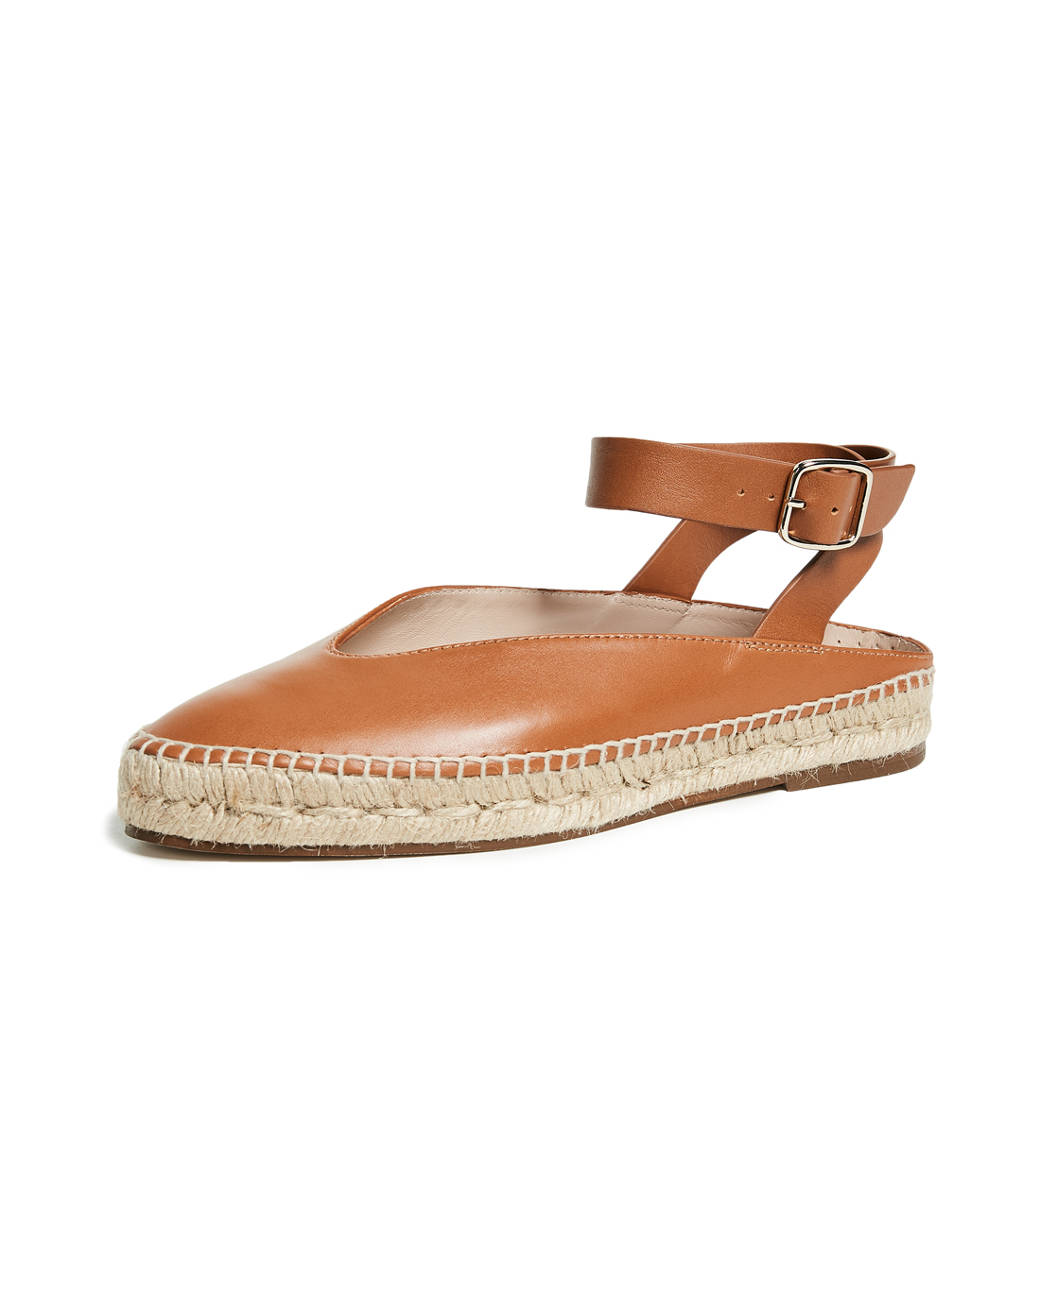 5 Espadrilles to Wear This Summer